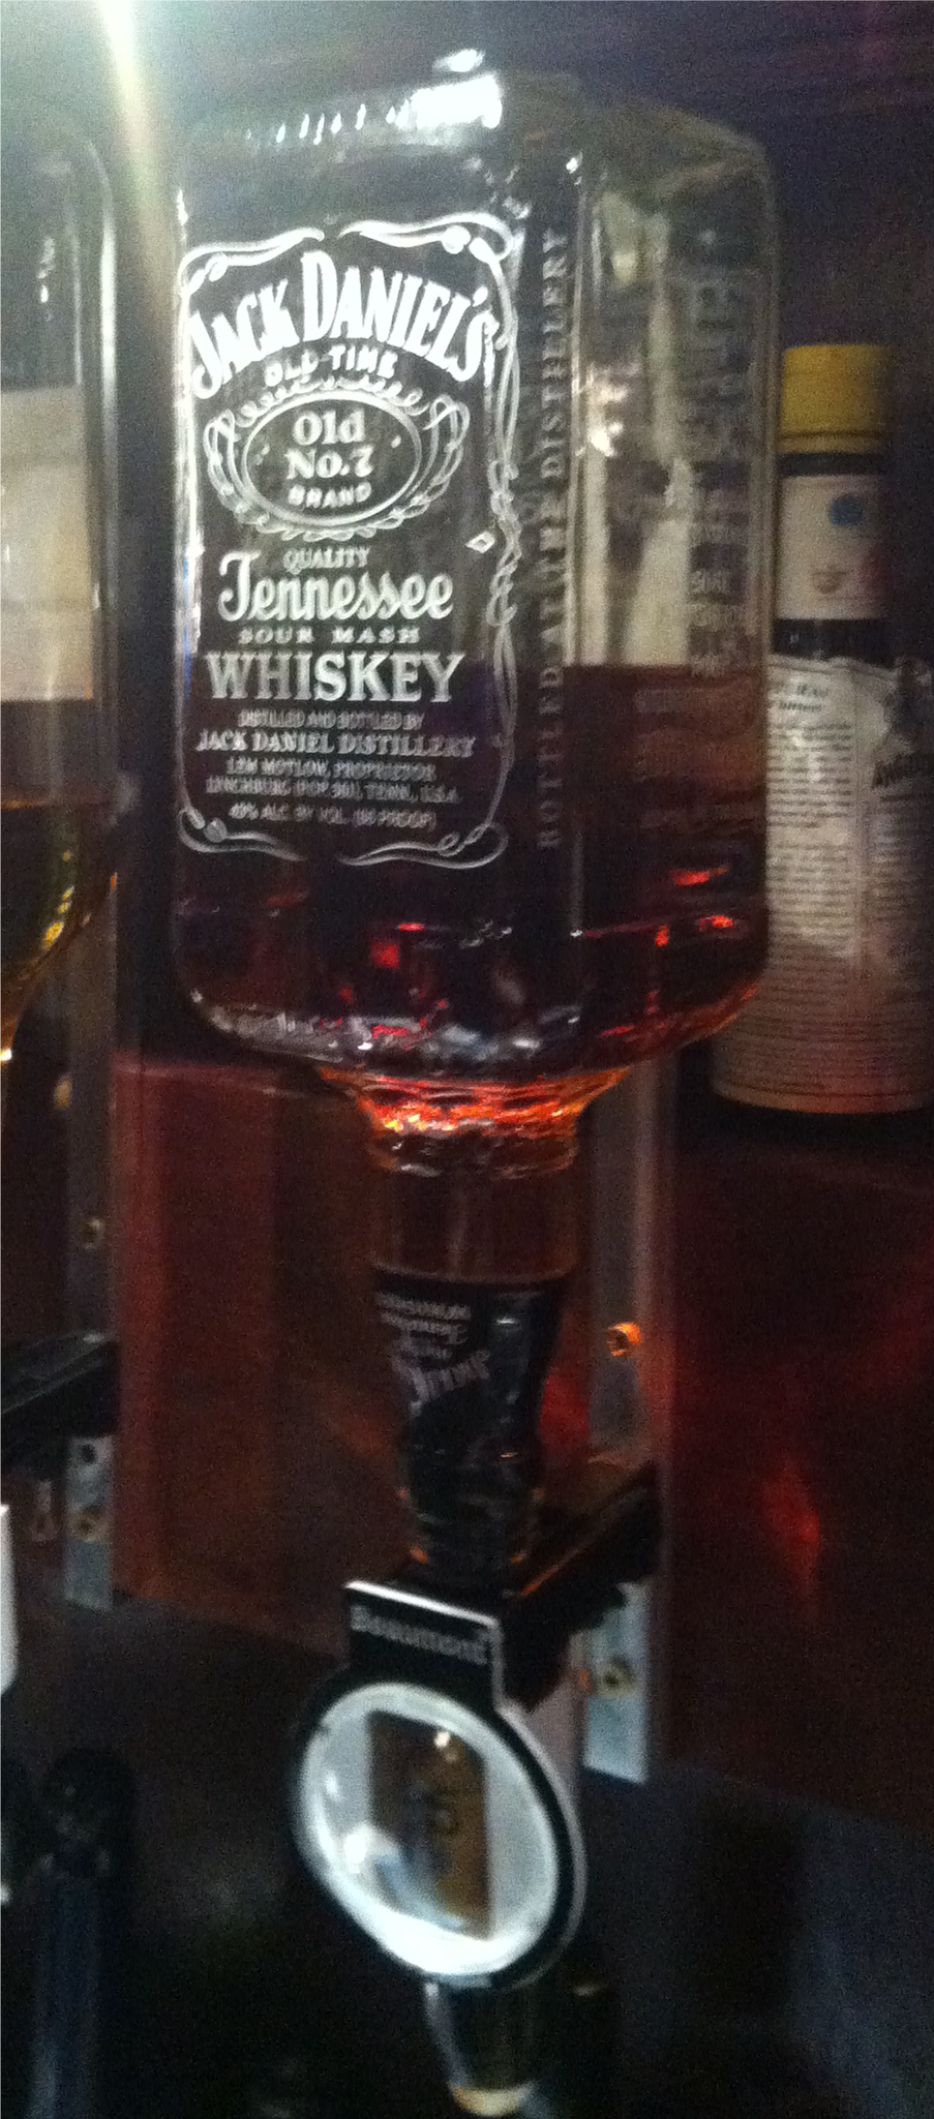 An optic bottle engraved with the label of Jack Daniels.